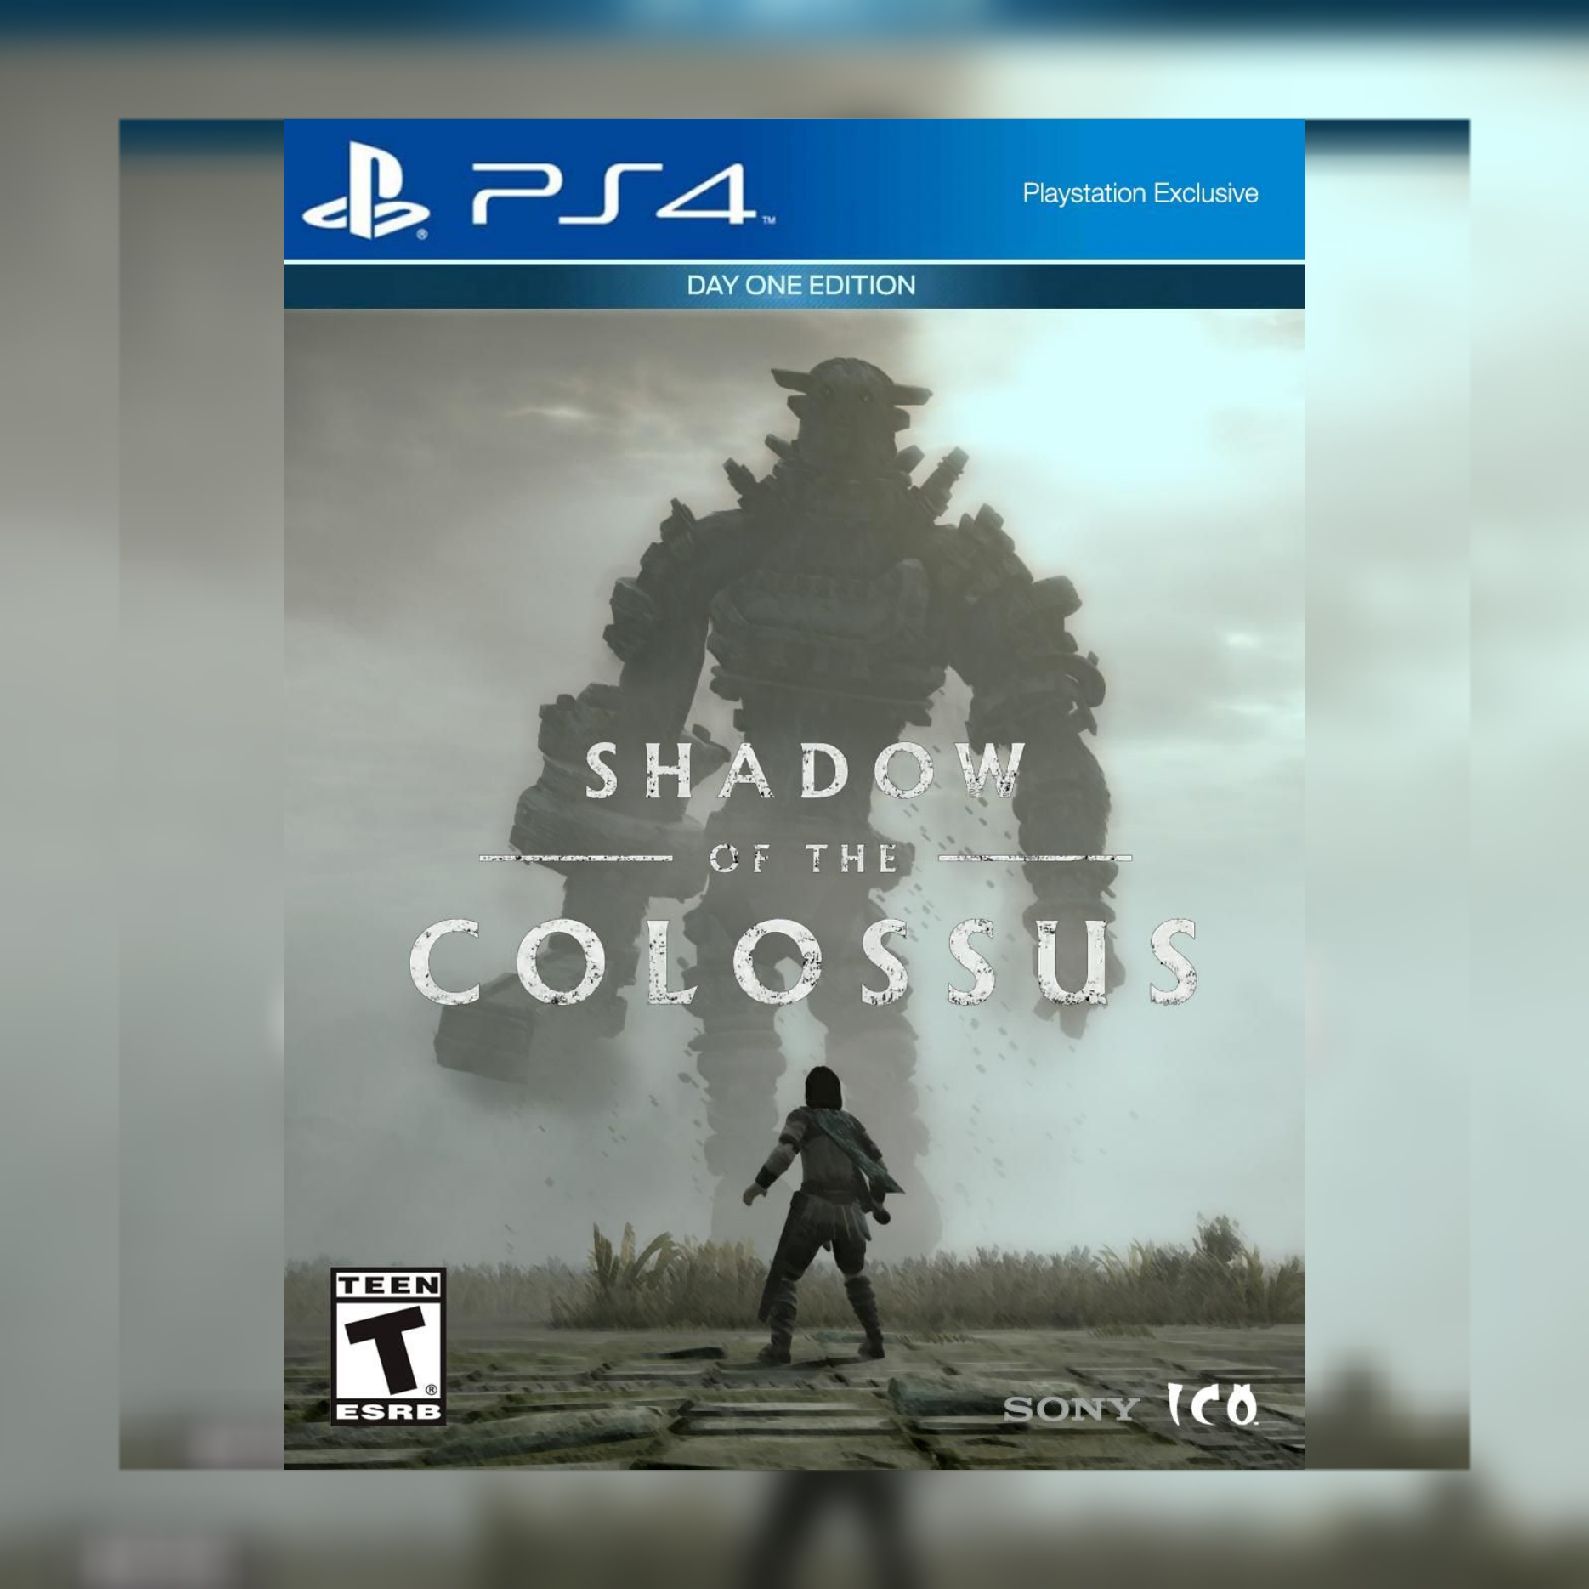 Shadow of the Colossus - PS4 - Game Games - Loja de Games